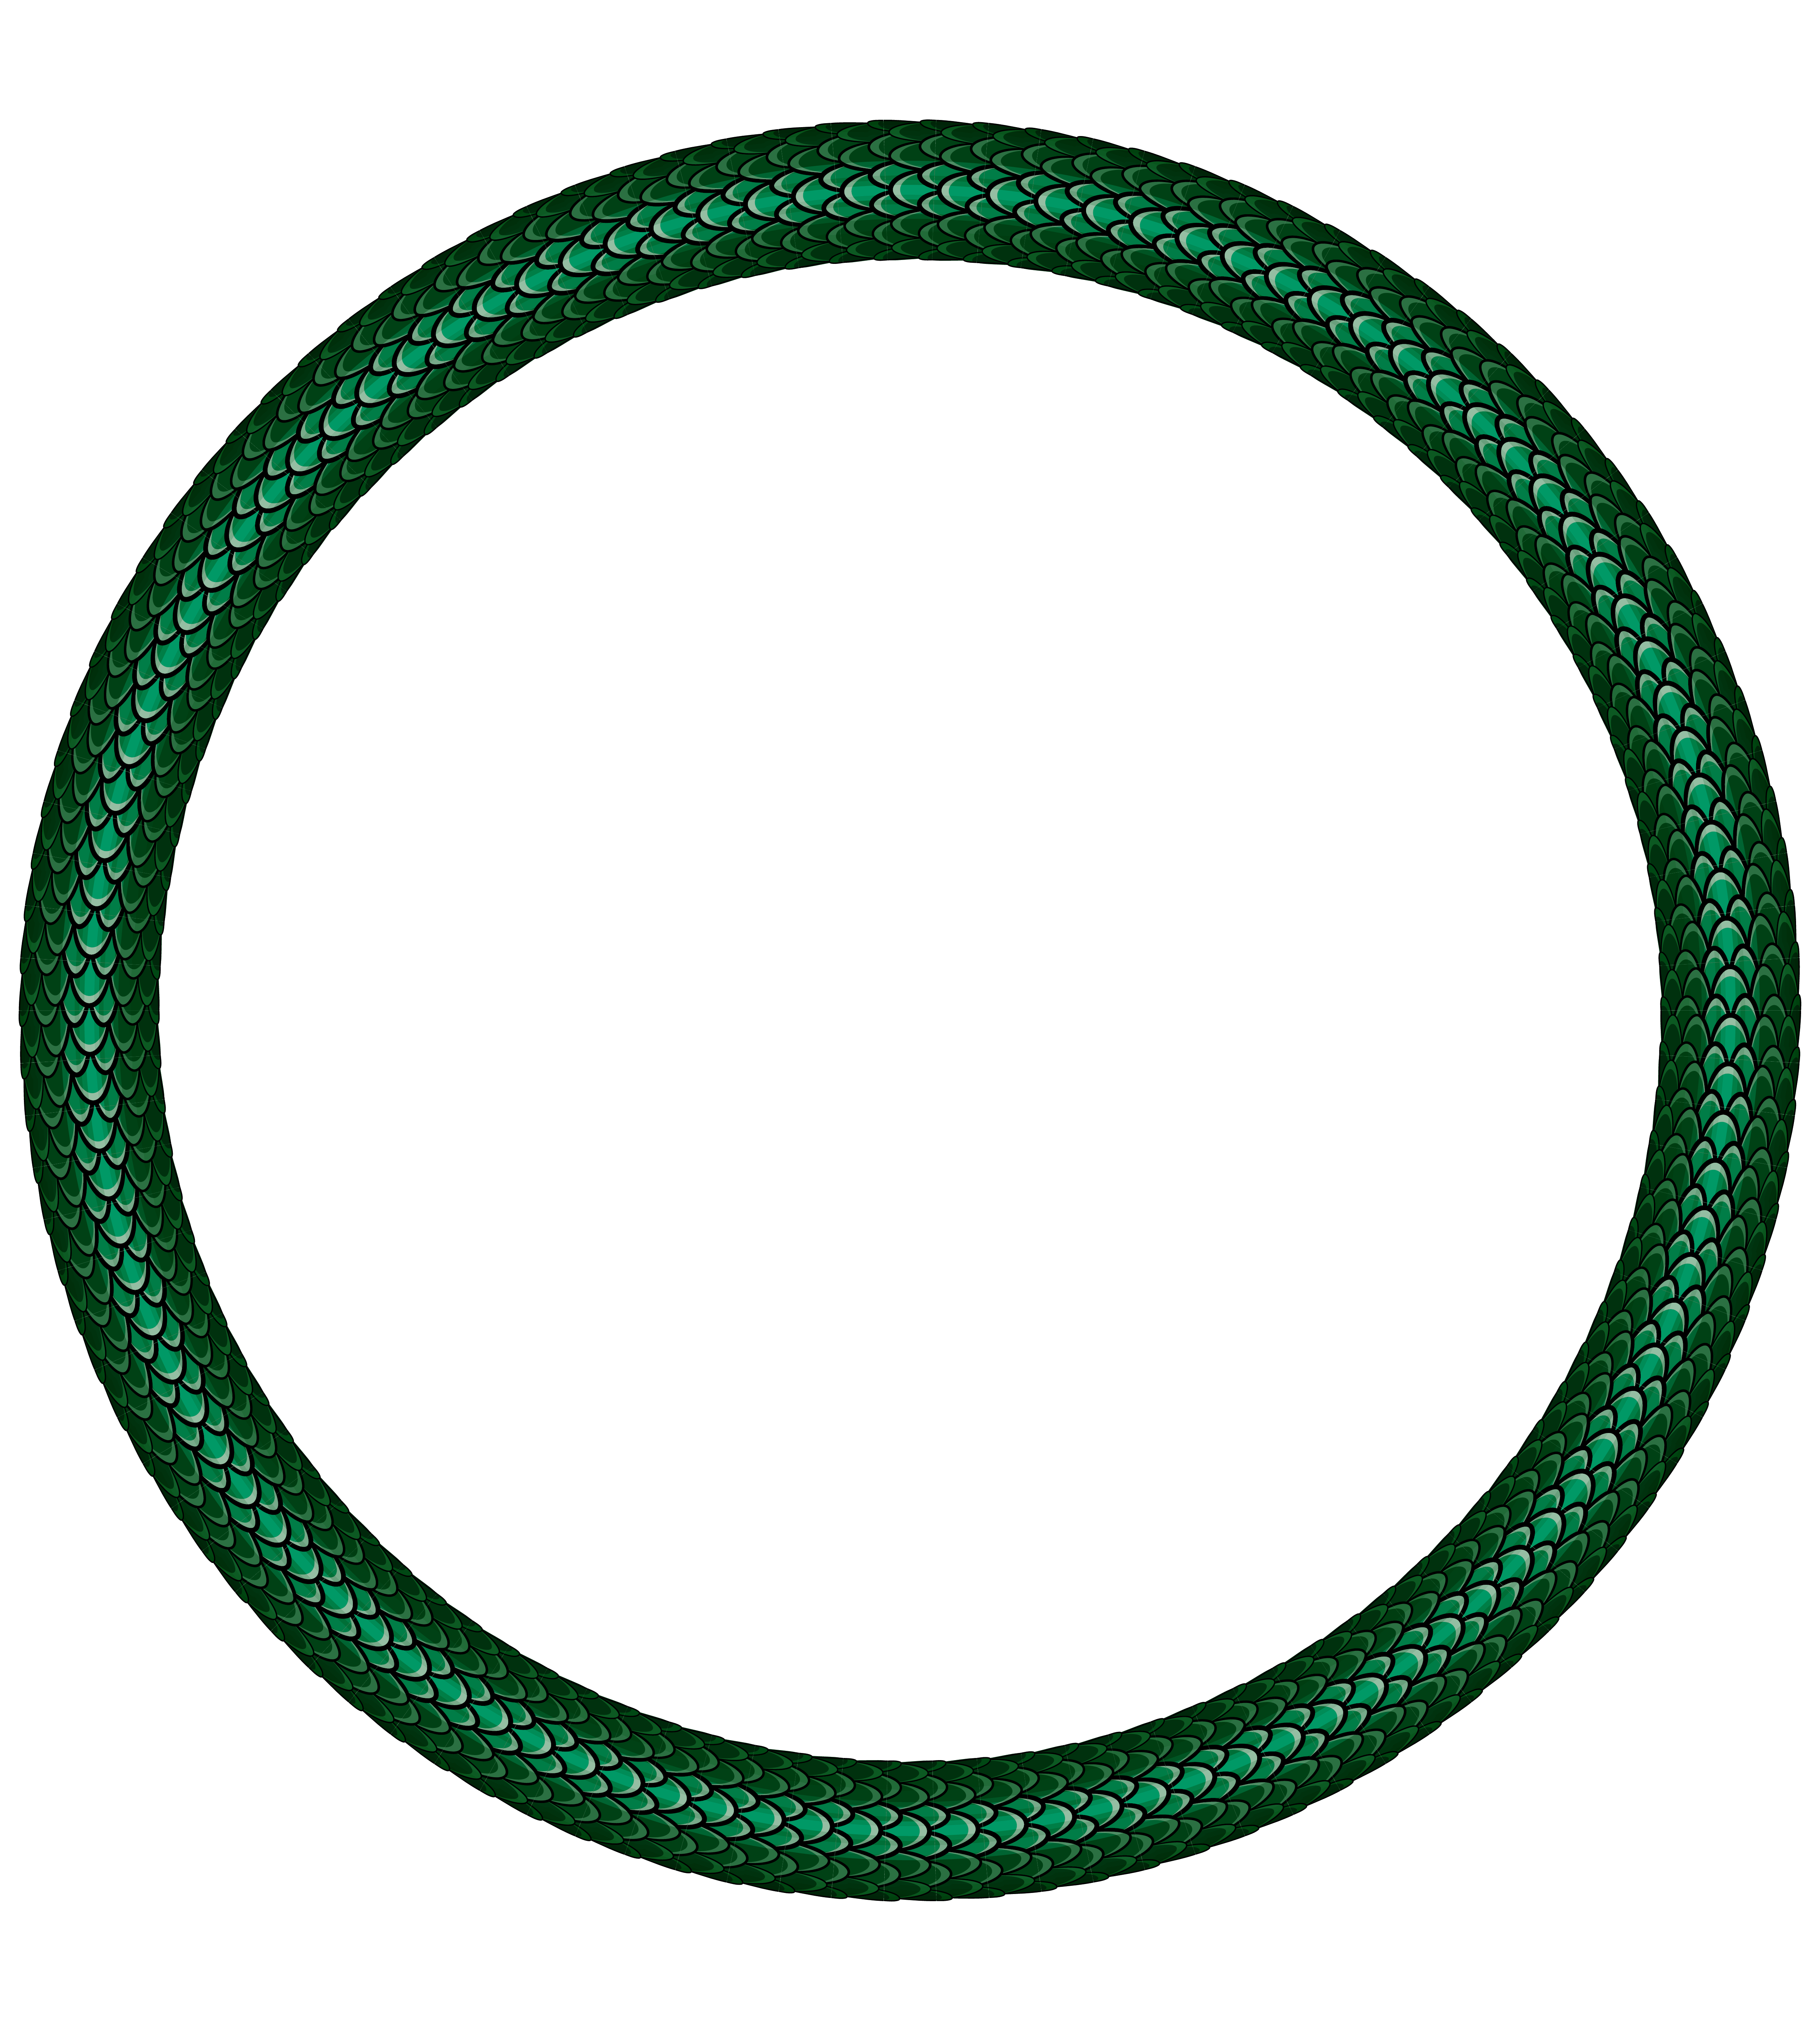 The Wicked Wand Shoppe